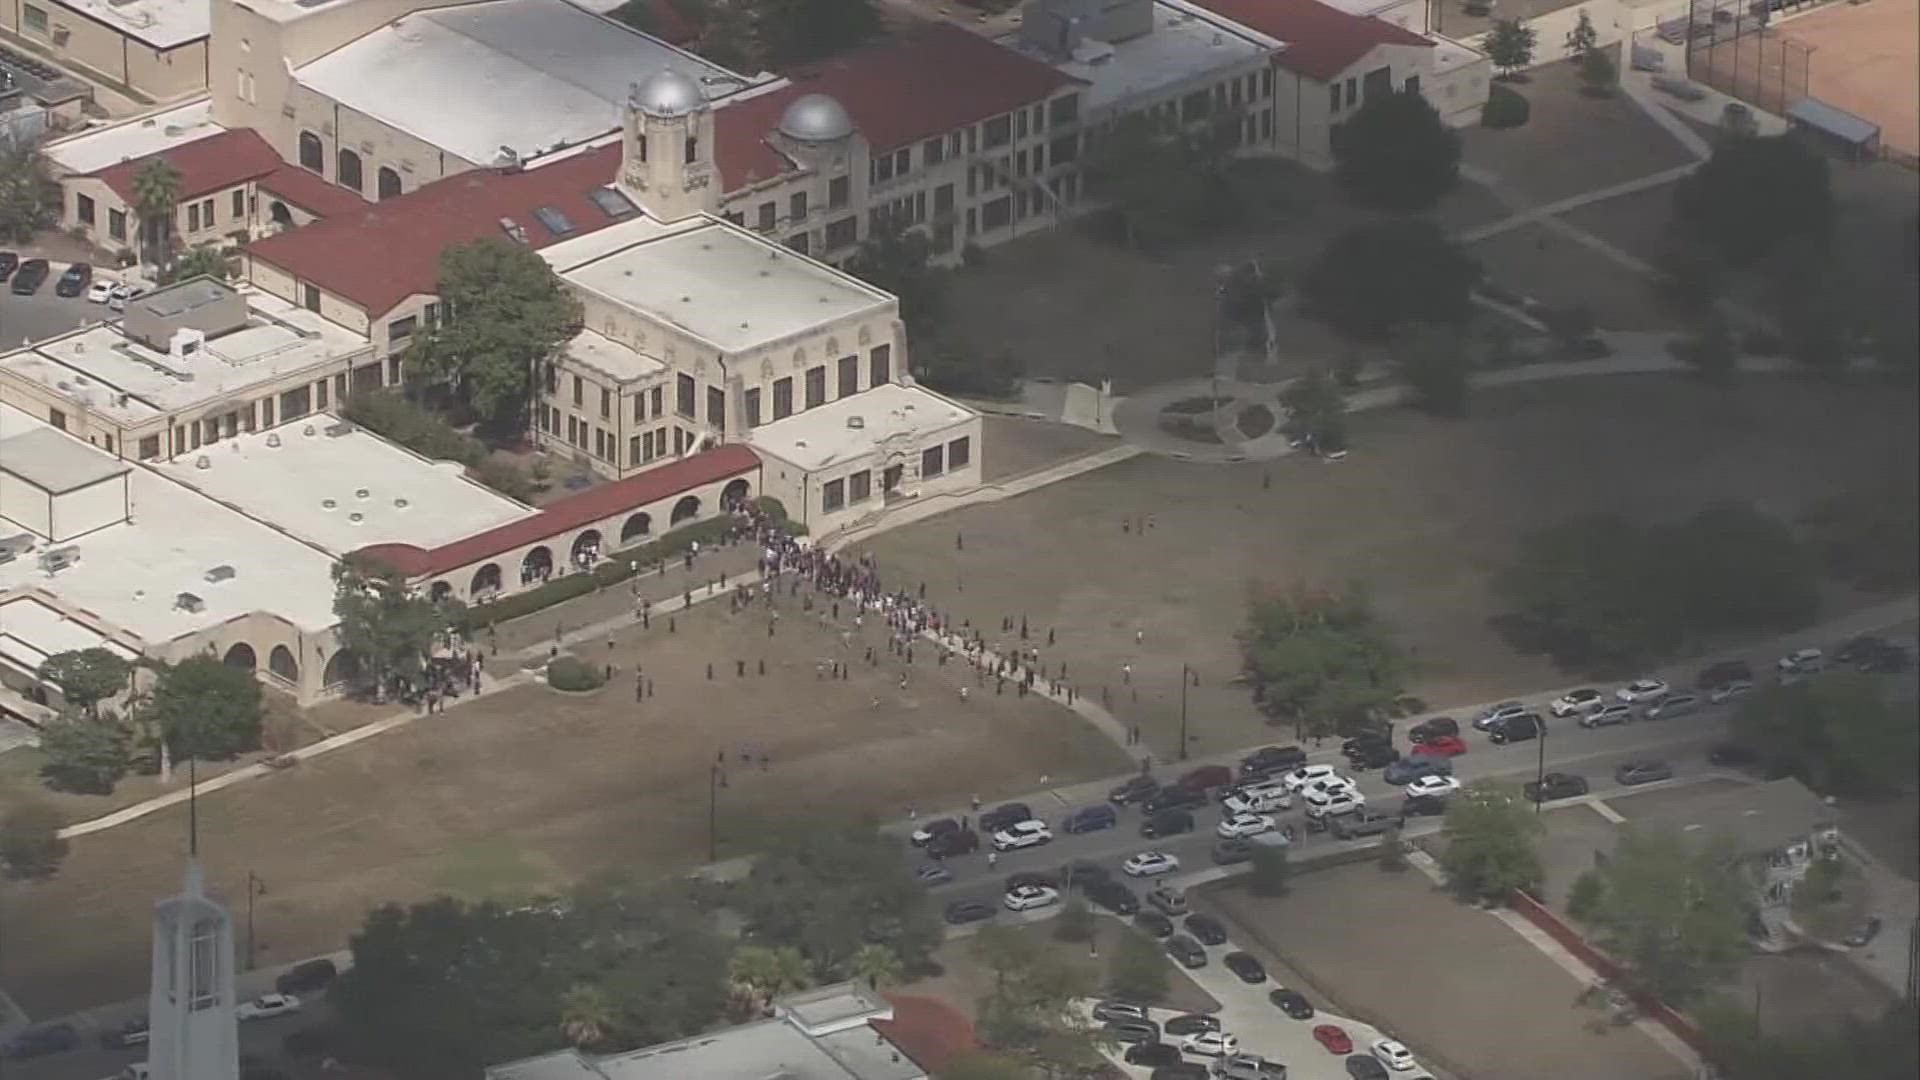 Questions still remain after the lockdown. Police said there was no active shooter on campus.